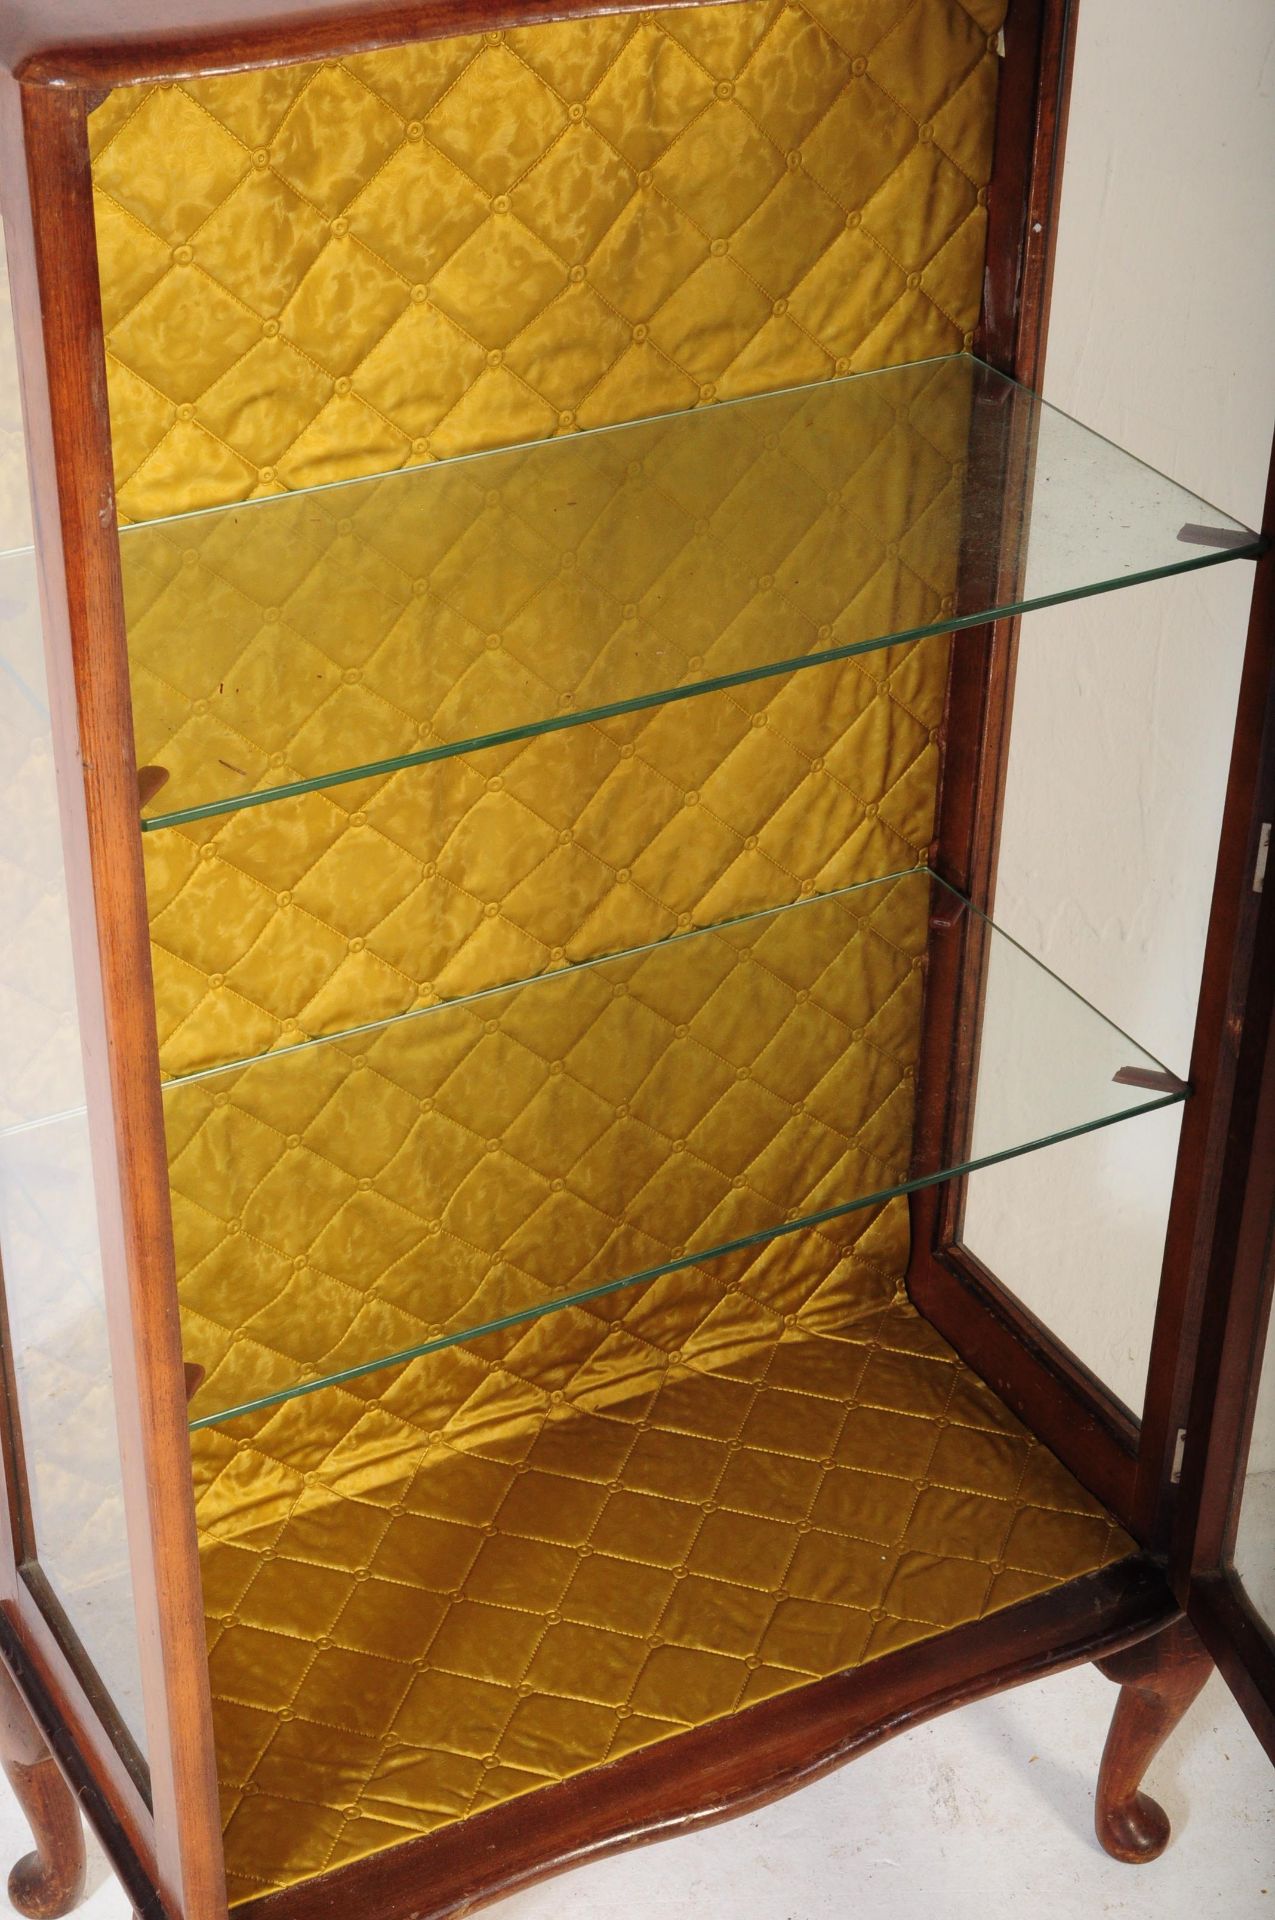 VINTAGE 1940'S QUEEN ANNE REVIVAL DISPLAY CABINET - Image 3 of 4